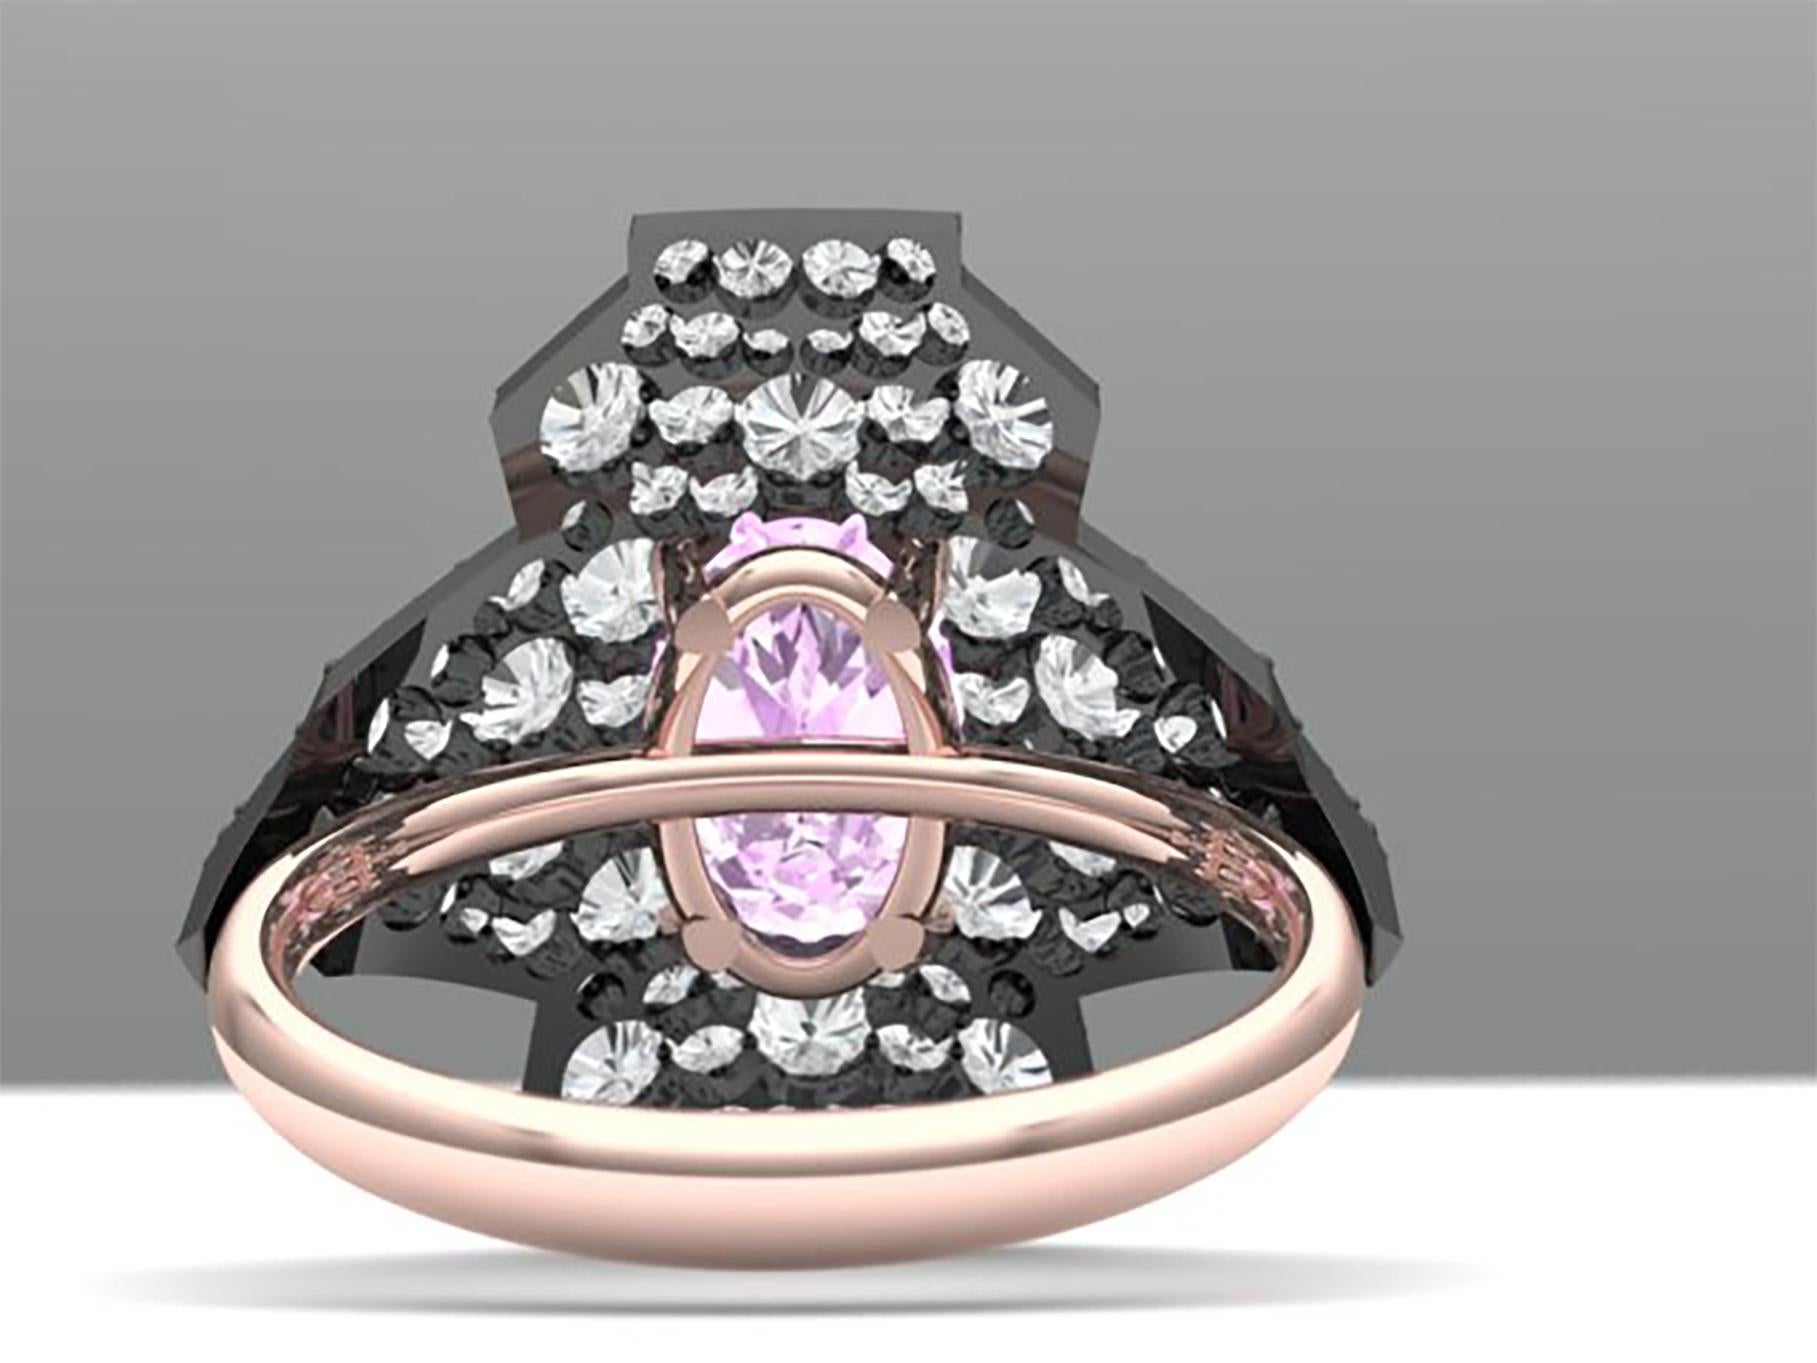 This shield ring style ring has a gorgeous surface laid with grey white round brilliant diamonds.  The center stone is a pink oval Tourmaline that is oval cut and weighs 1.5 carats appx.  The center stone is accented by 1.5 carats of diamonds set in